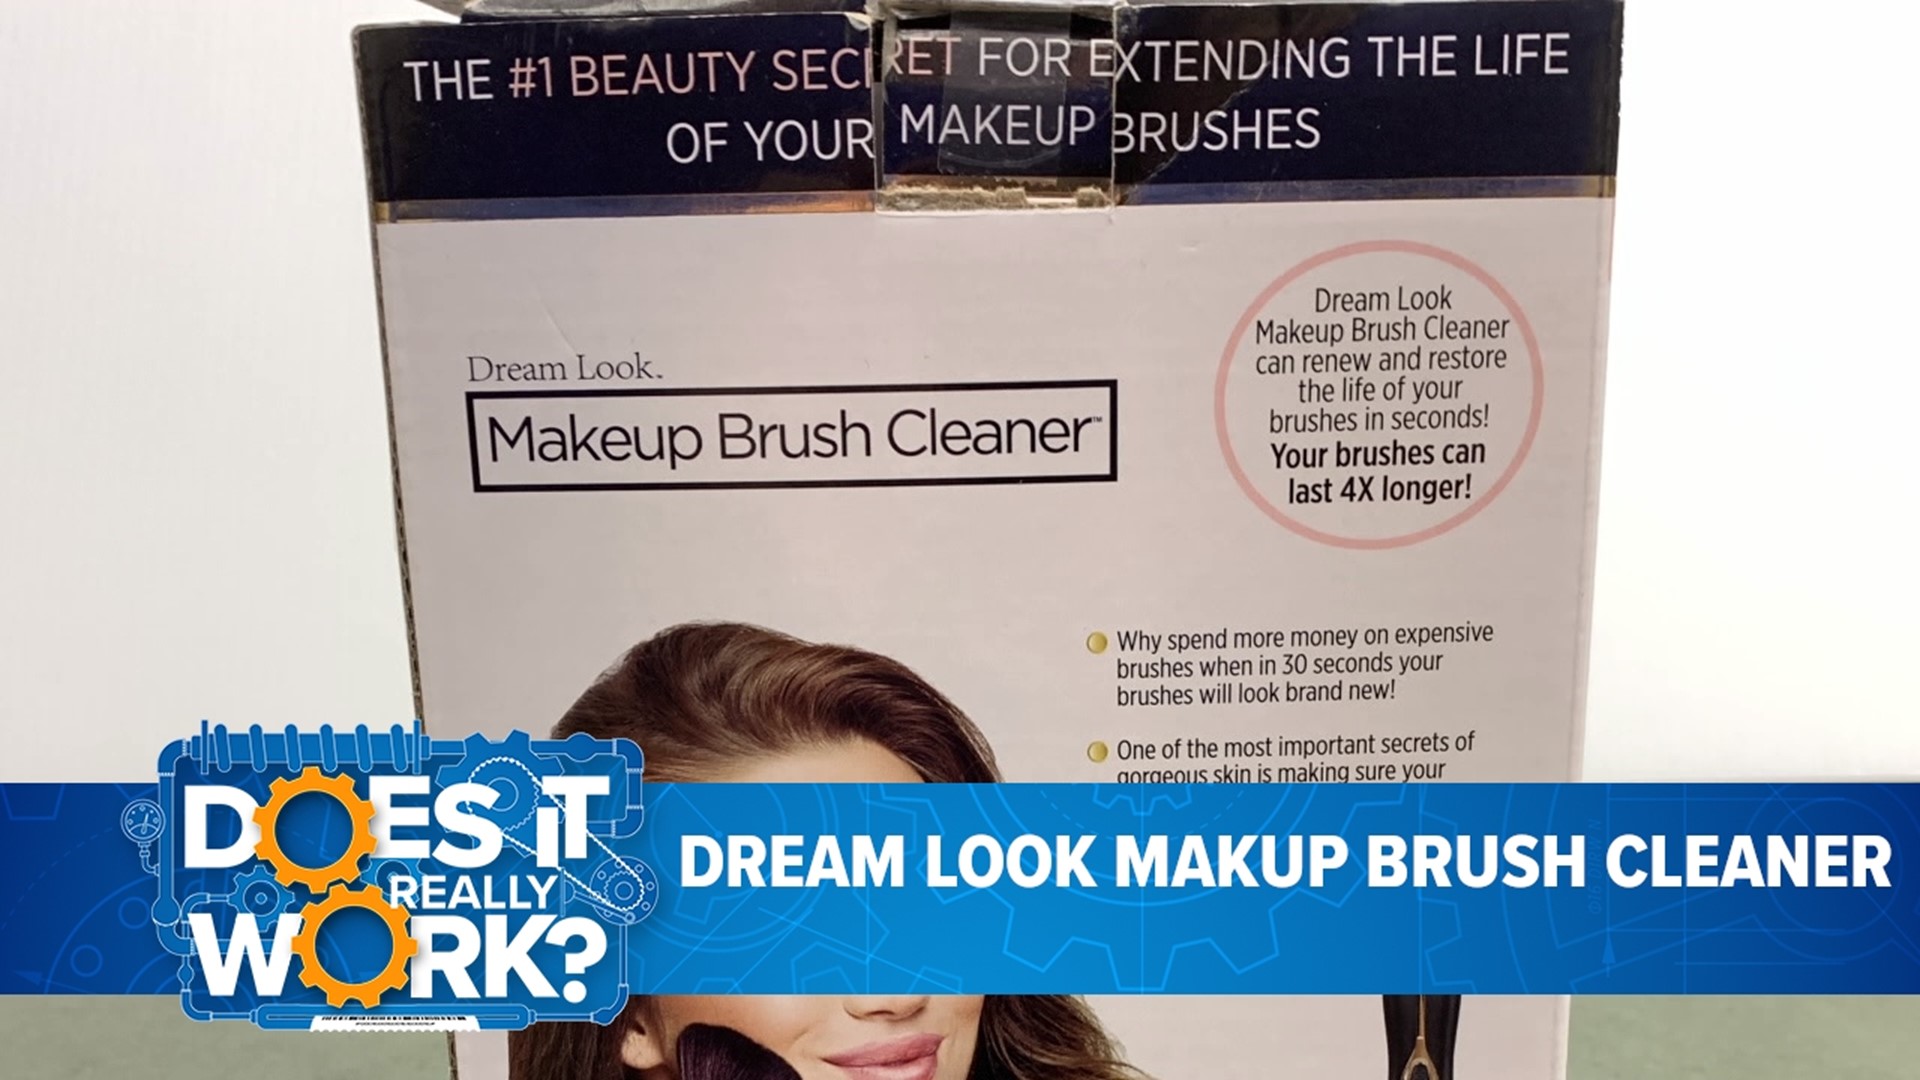 The maker claims you can use it on natural or synthetic brushes. Clean brushes allow your makeup to go on smoother and more evenly.